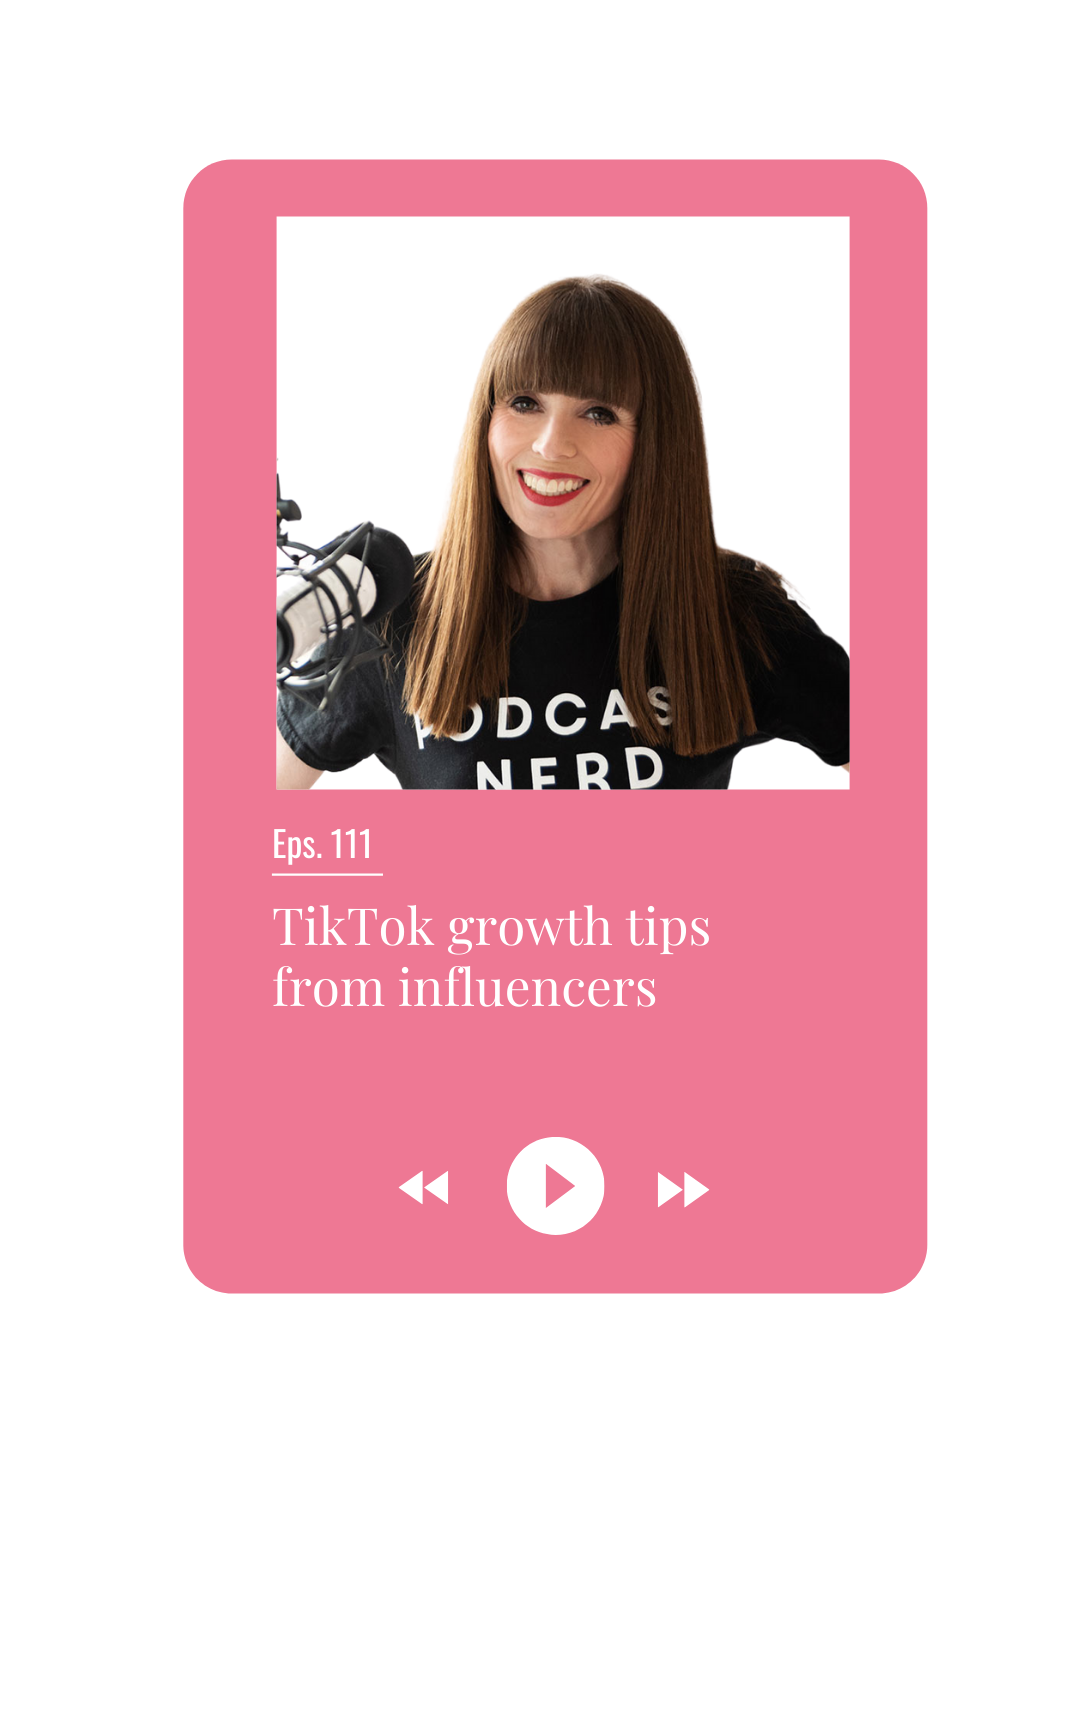 TikTok growth tips from influencers